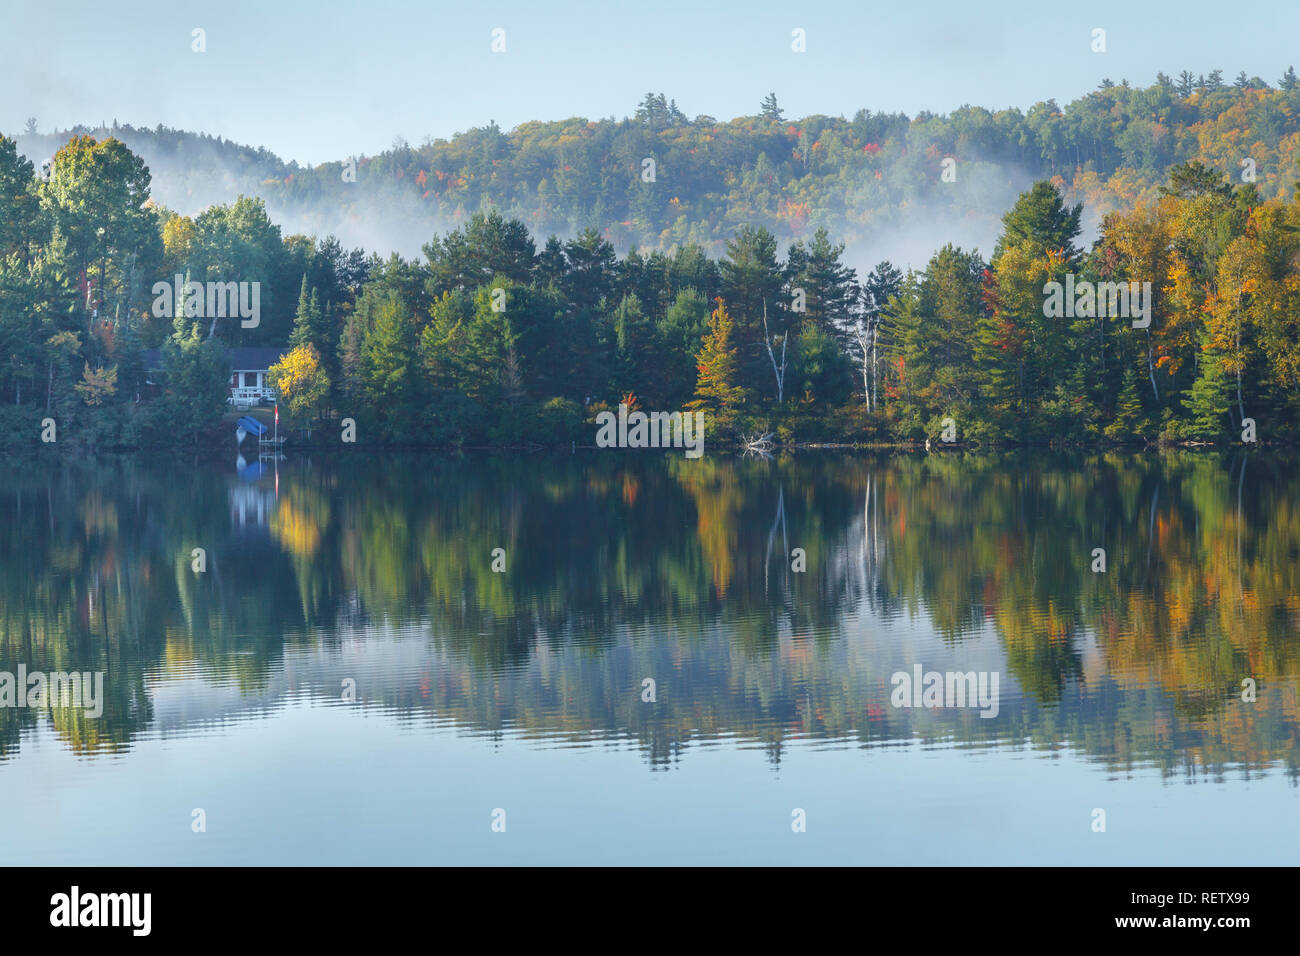 Early morning mist on a lake in Northern Ontario, Canada Stock Photo